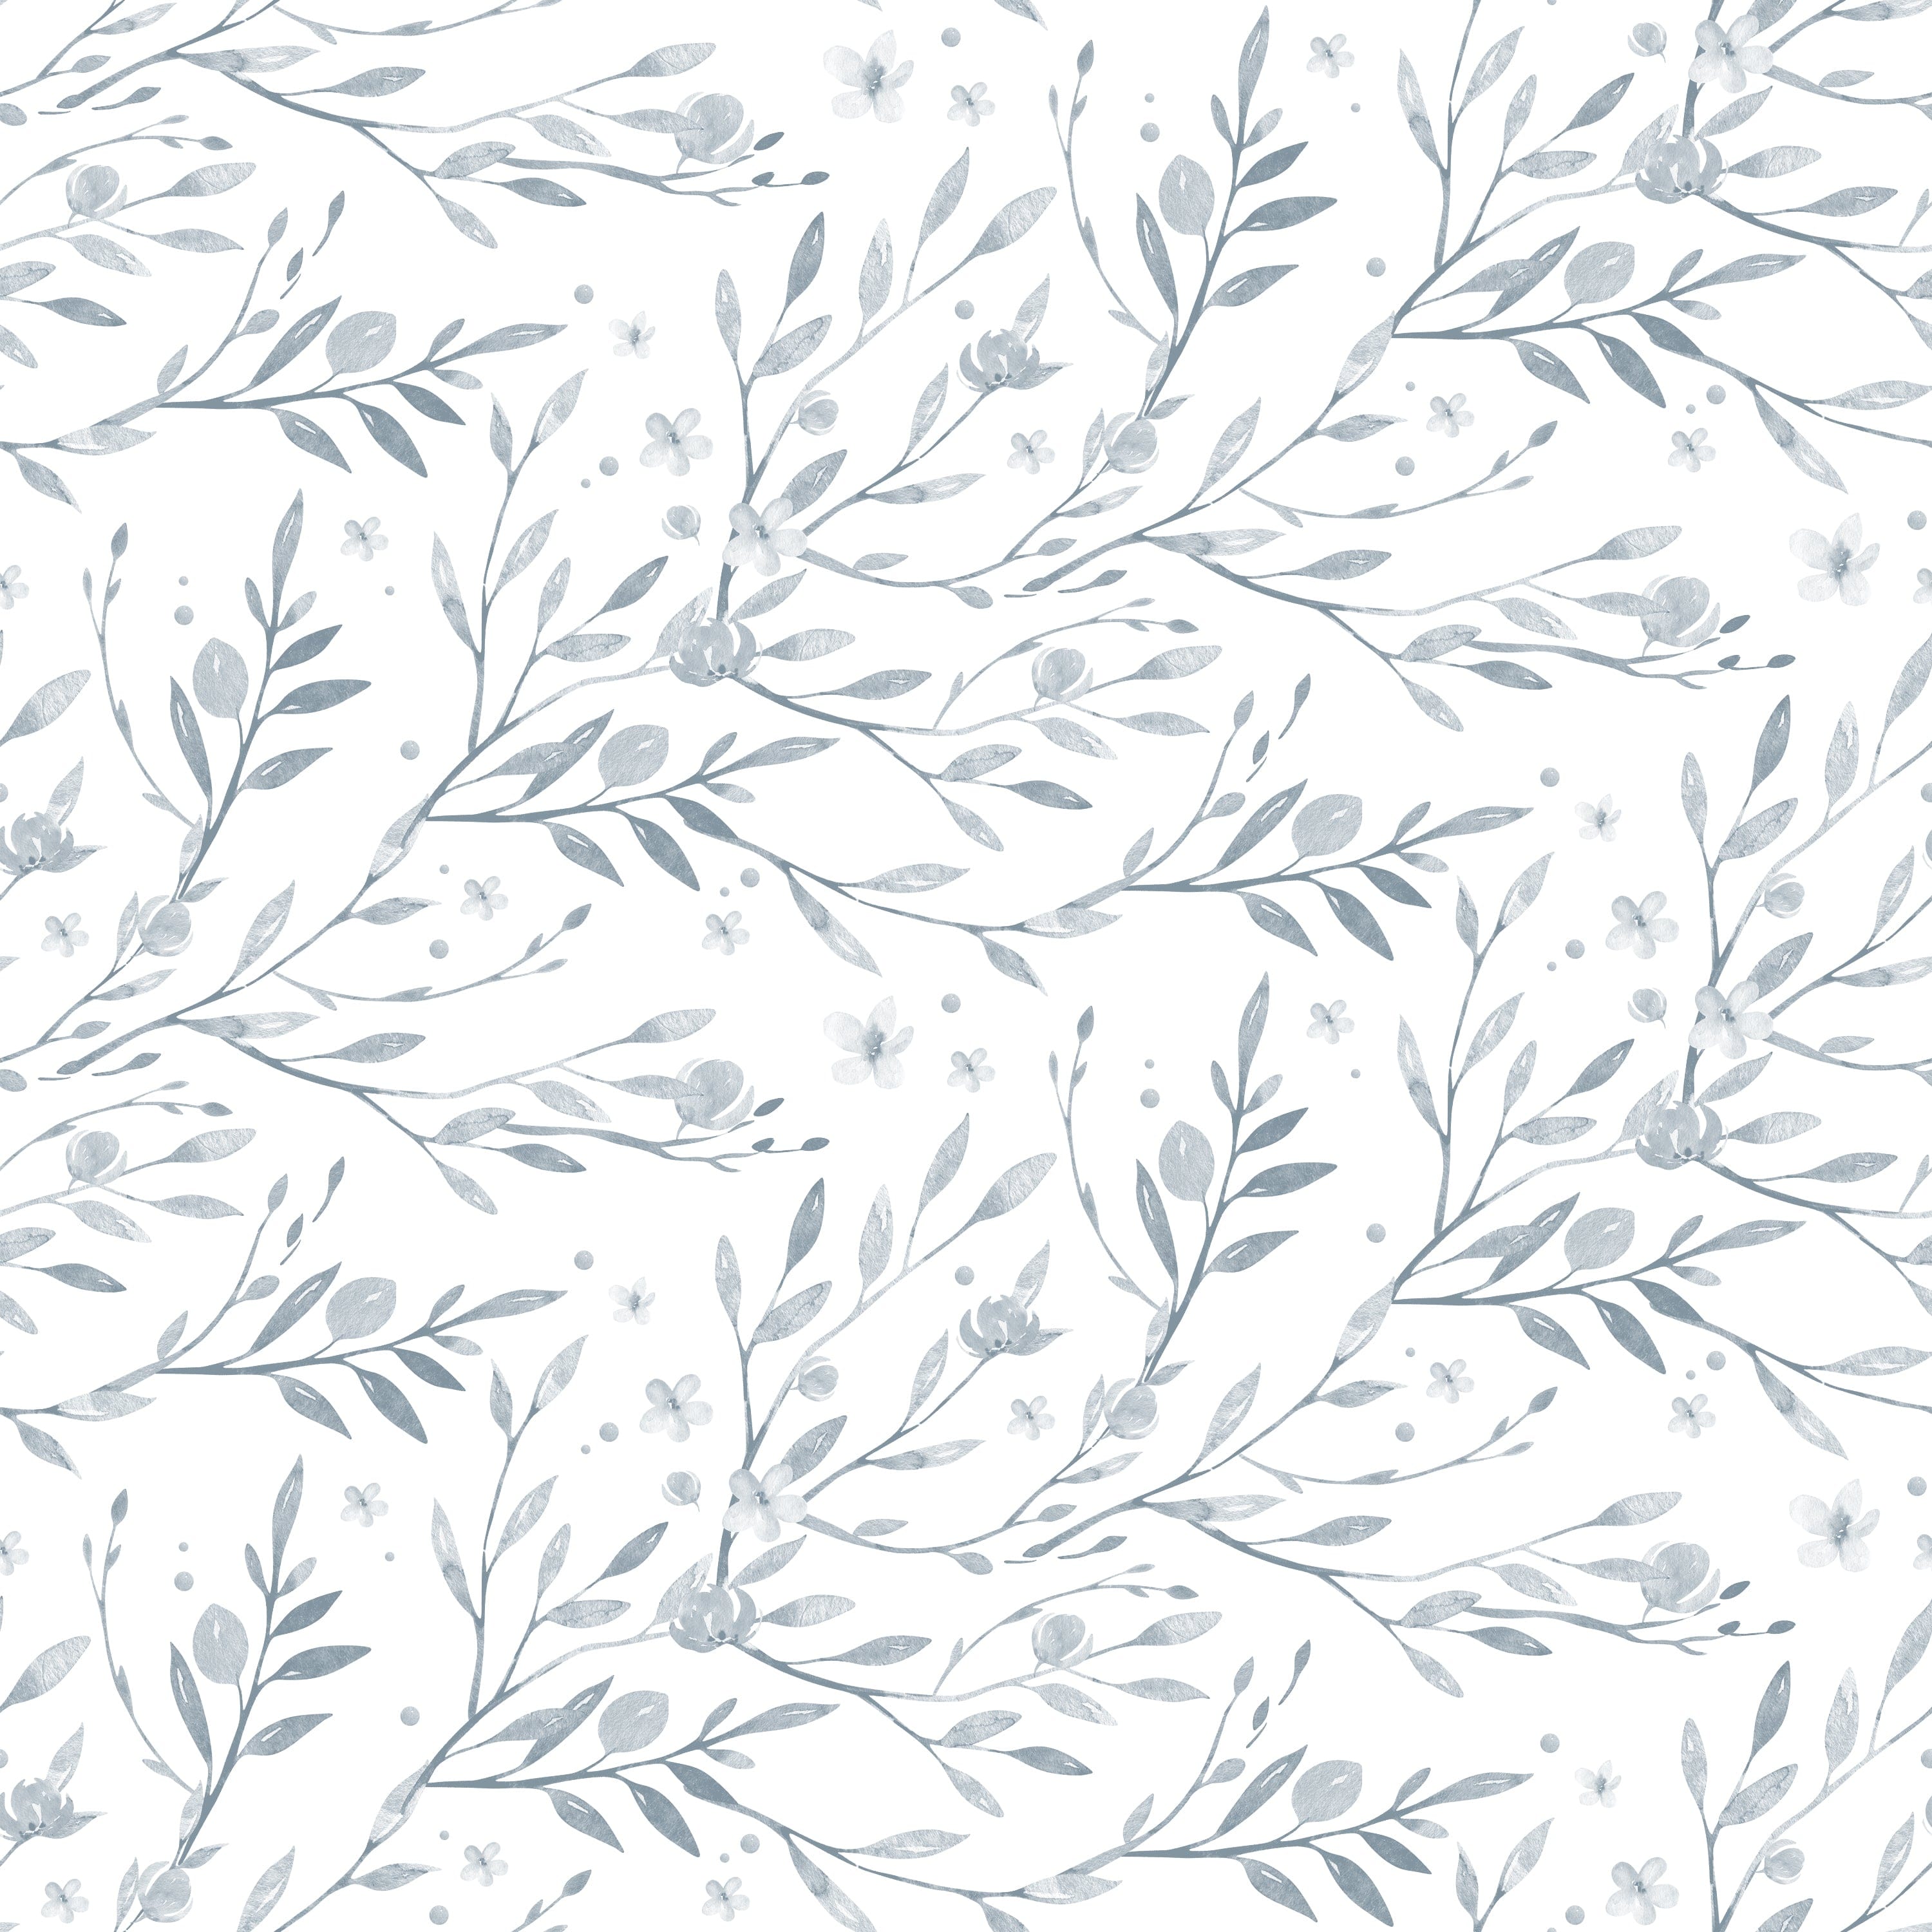 a close-up view of the wallpaper, highlighting its artistic watercolor design. The wallpaper features graceful branches with leaves and blooming flowers accompanied by quaint little birds, all rendered in a gentle palette of pale blues and whites. The dreamy, hand-painted quality of the pattern exudes the freshness of spring and would add a serene touch to any room.